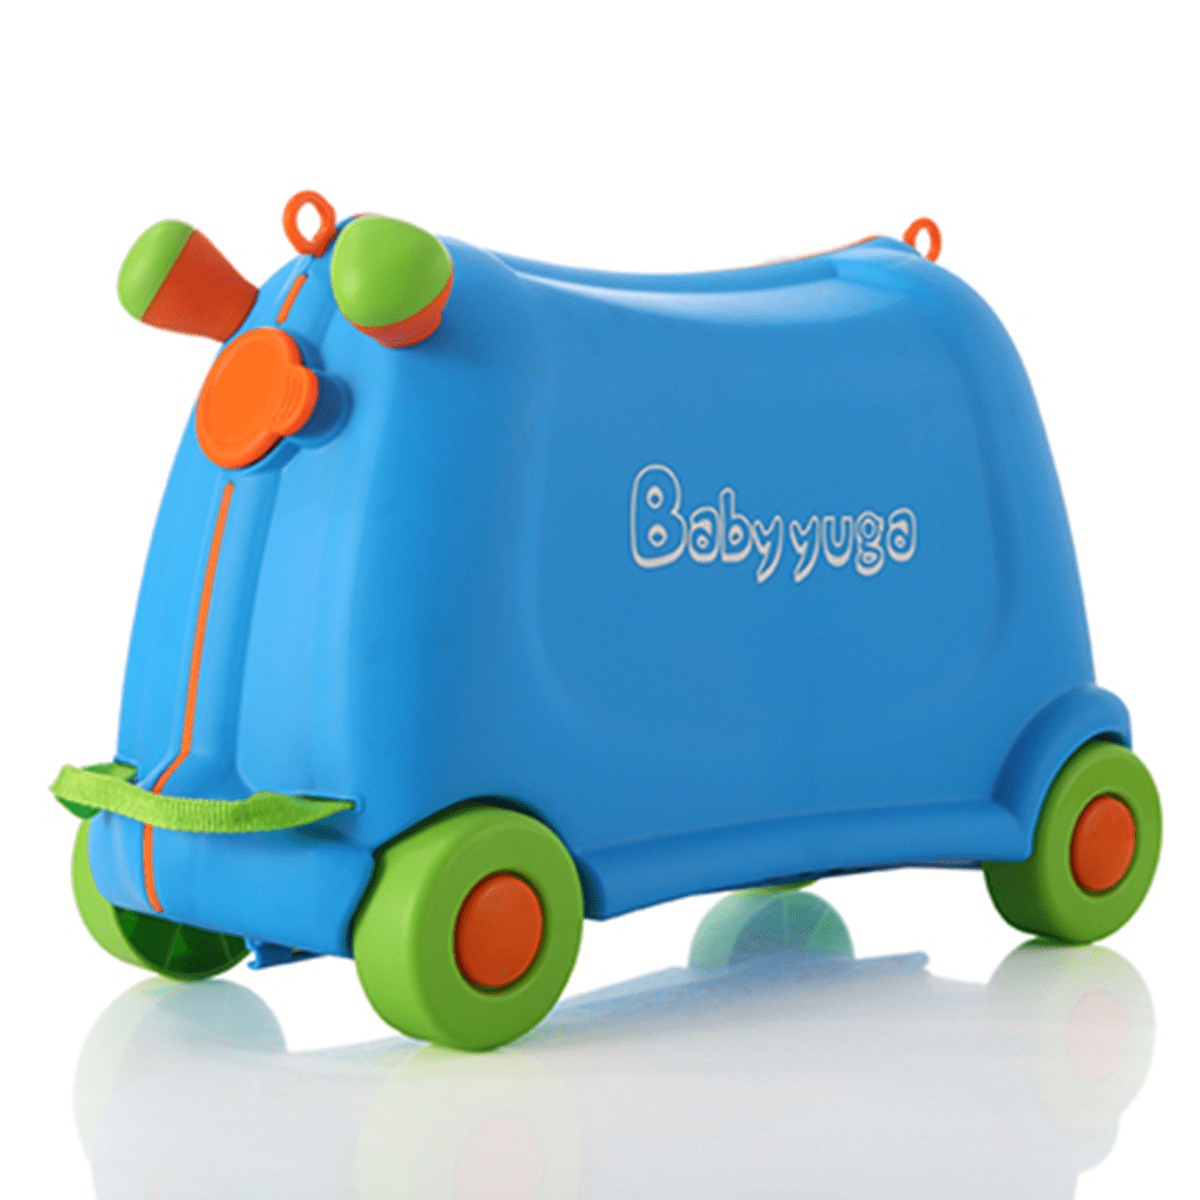 Little Angel - Baby Trunk Ride-On suitcase - Blue